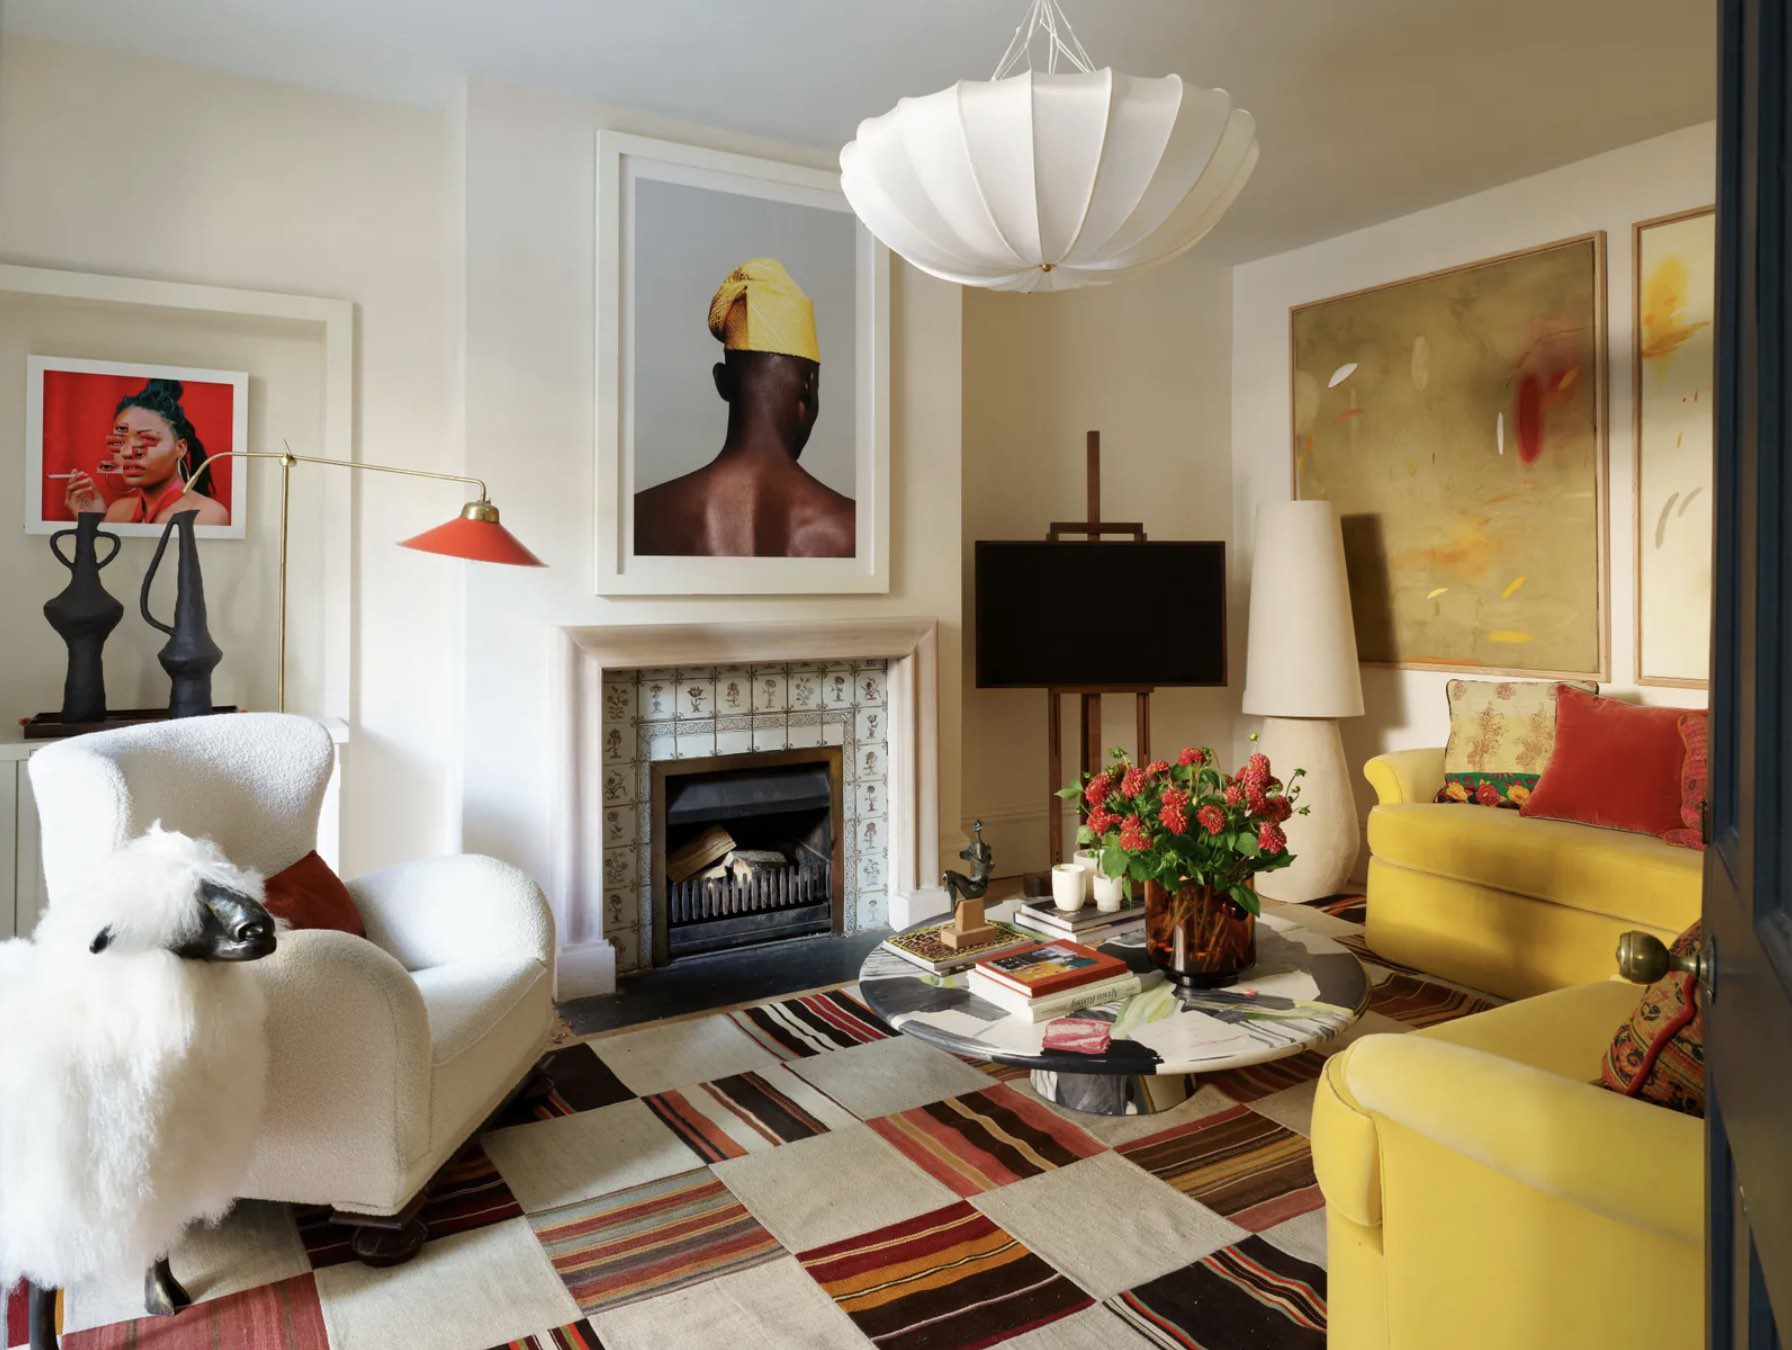 5 People Whose Homes Highlight the Art of the Mix in Interior Design